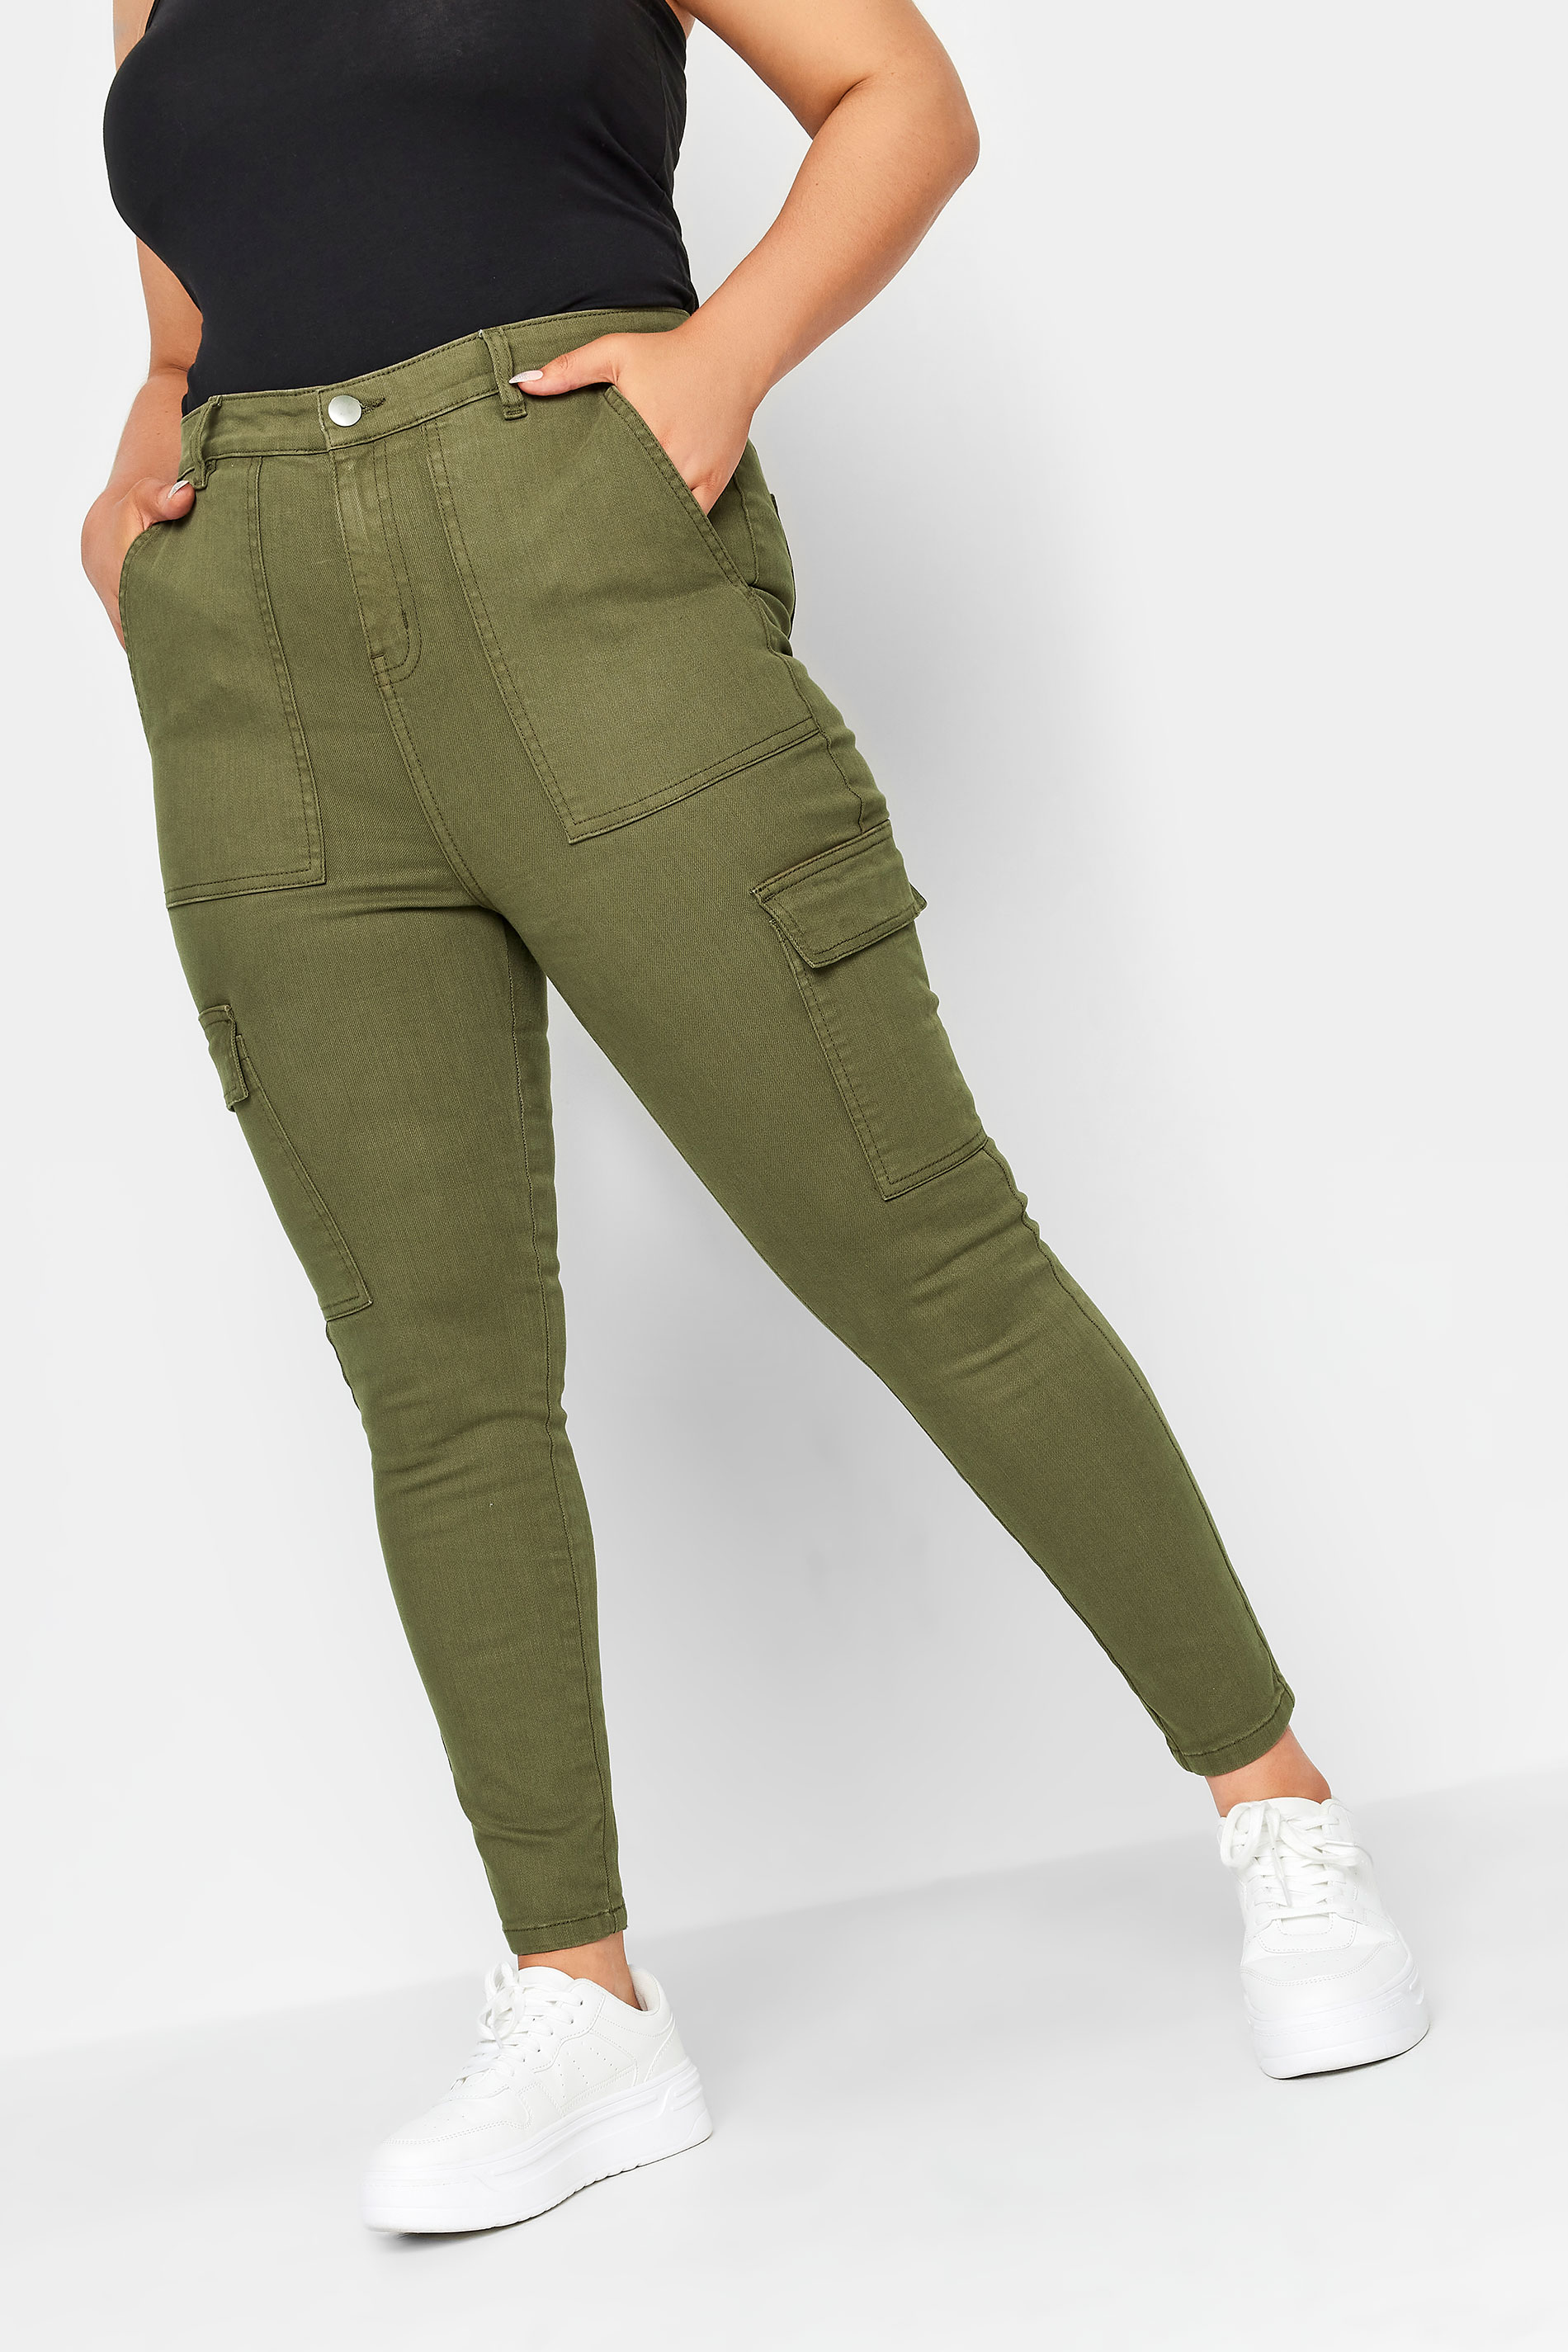 YOURS Curve Plus Size Khaki Green Cargo AVA Jeans | Yours Clothing  1